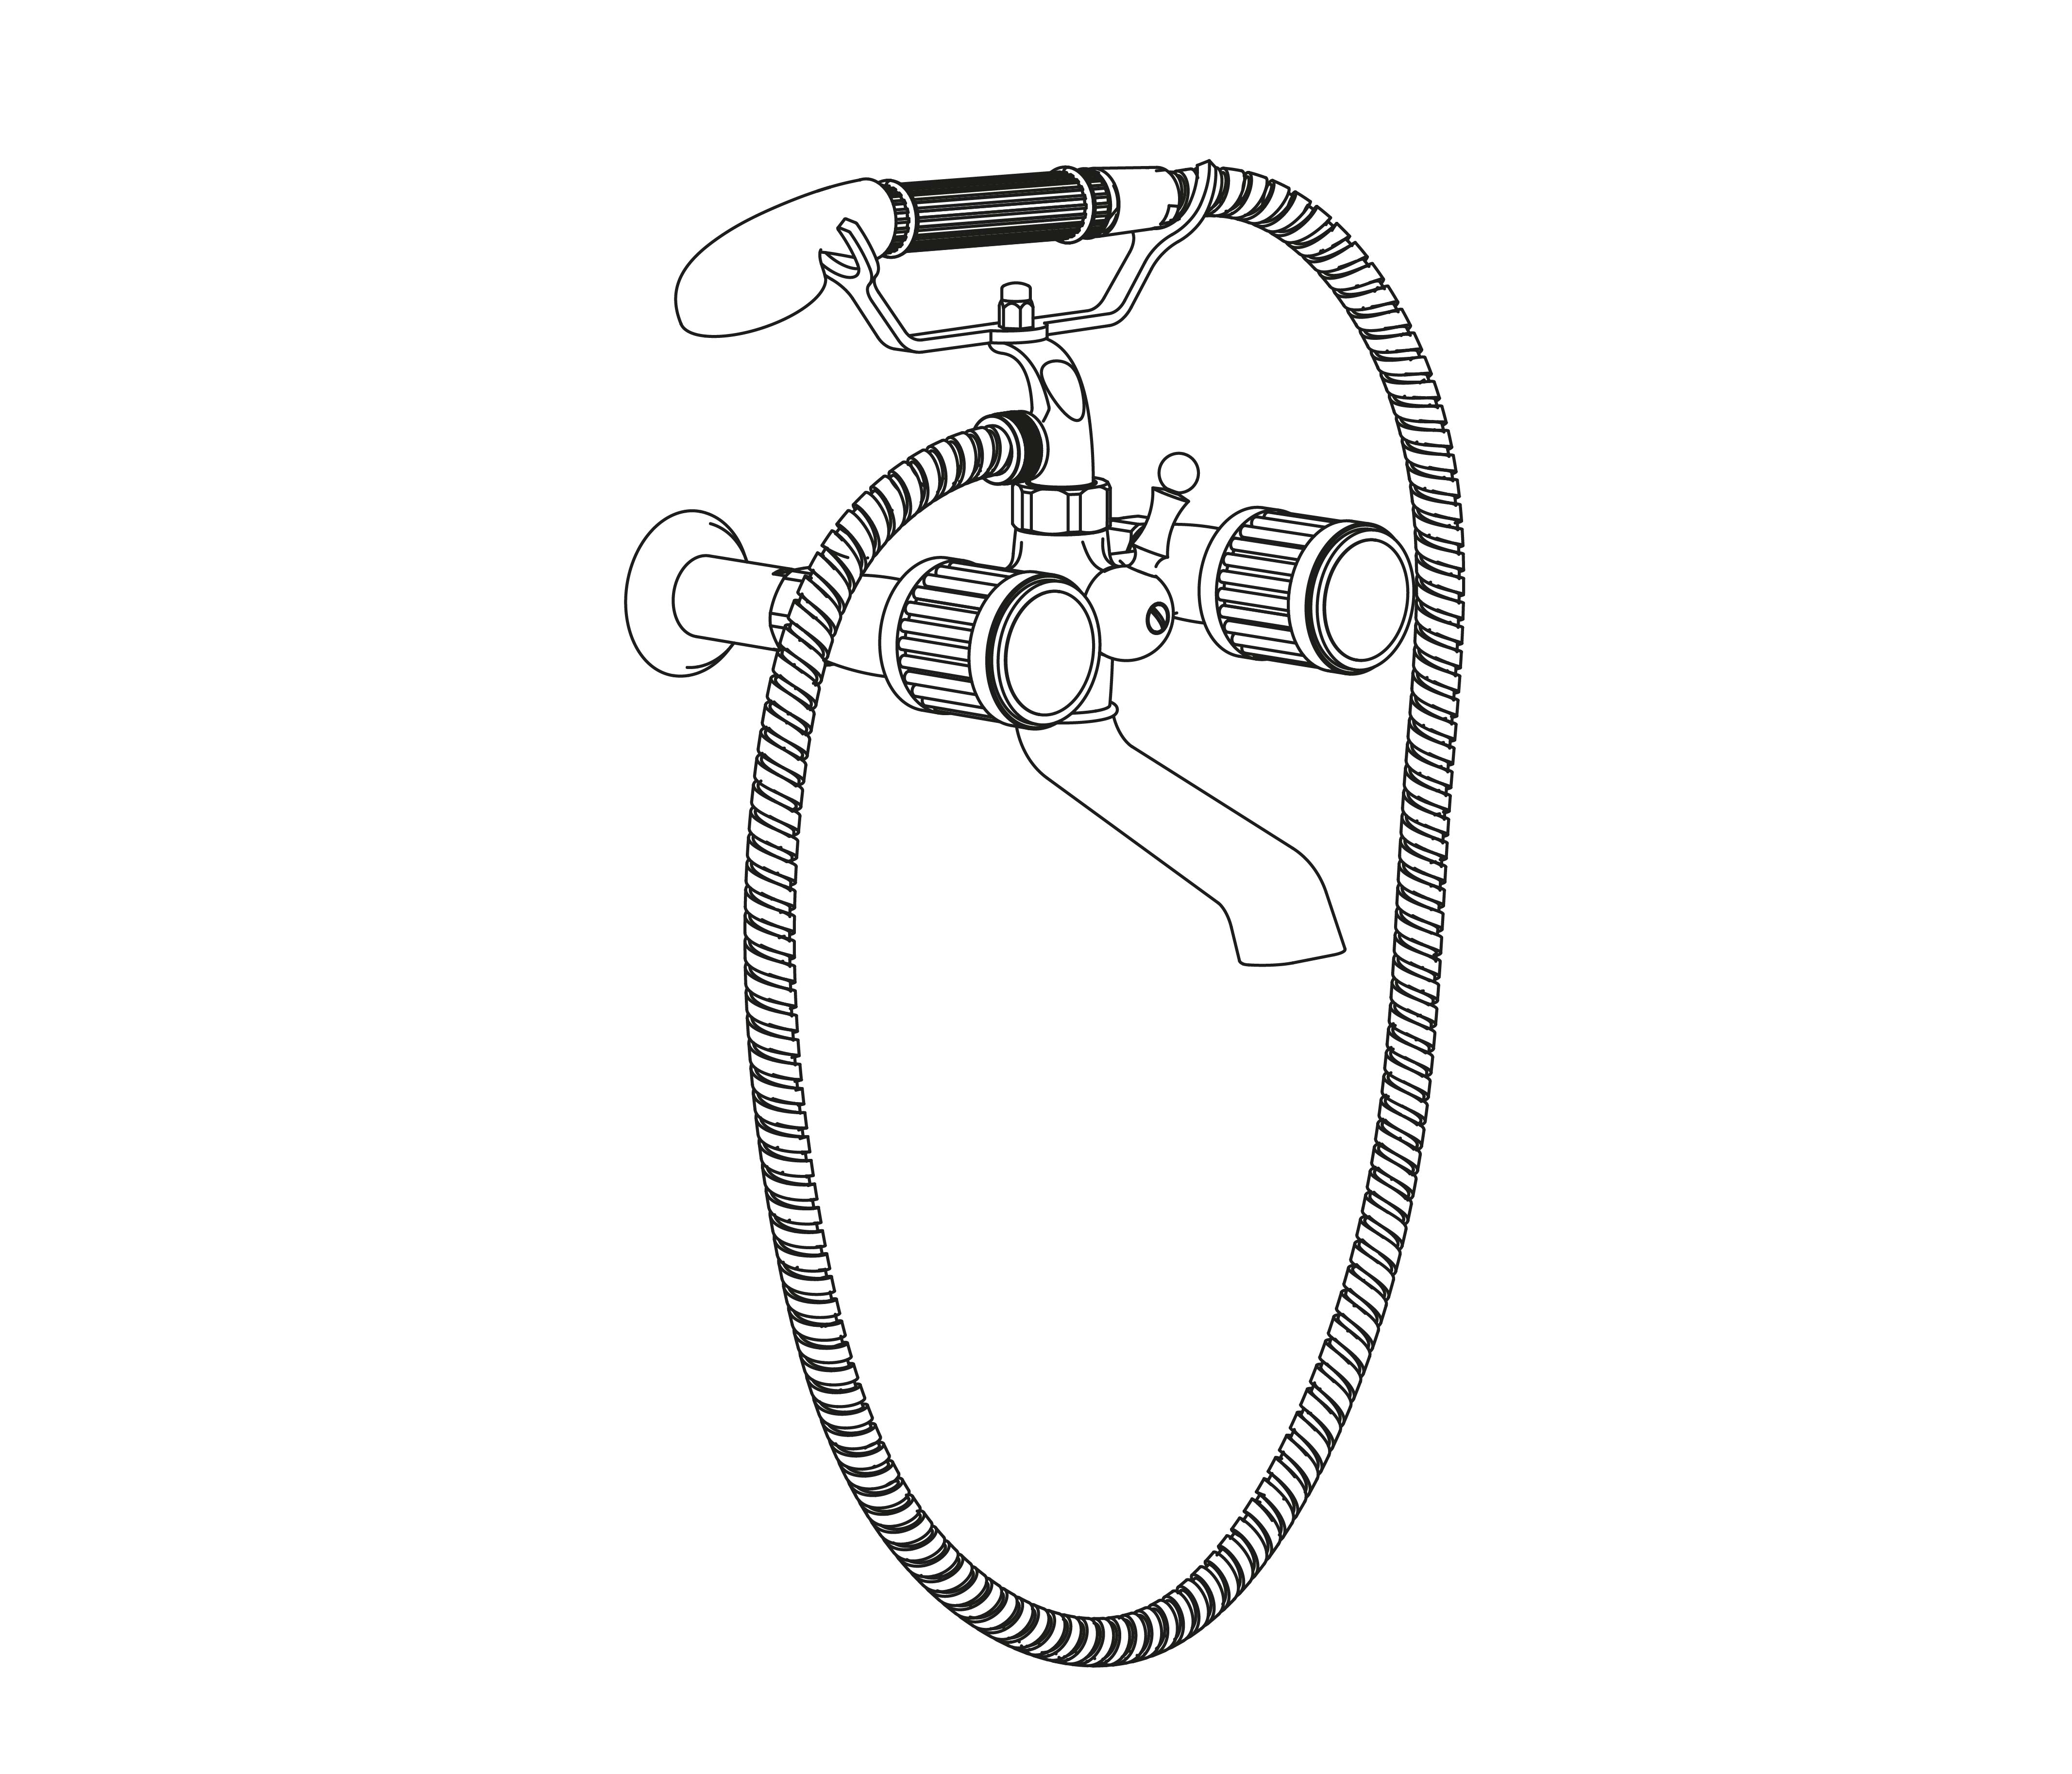 S91-3201 Wall mounted bath and shower mixer